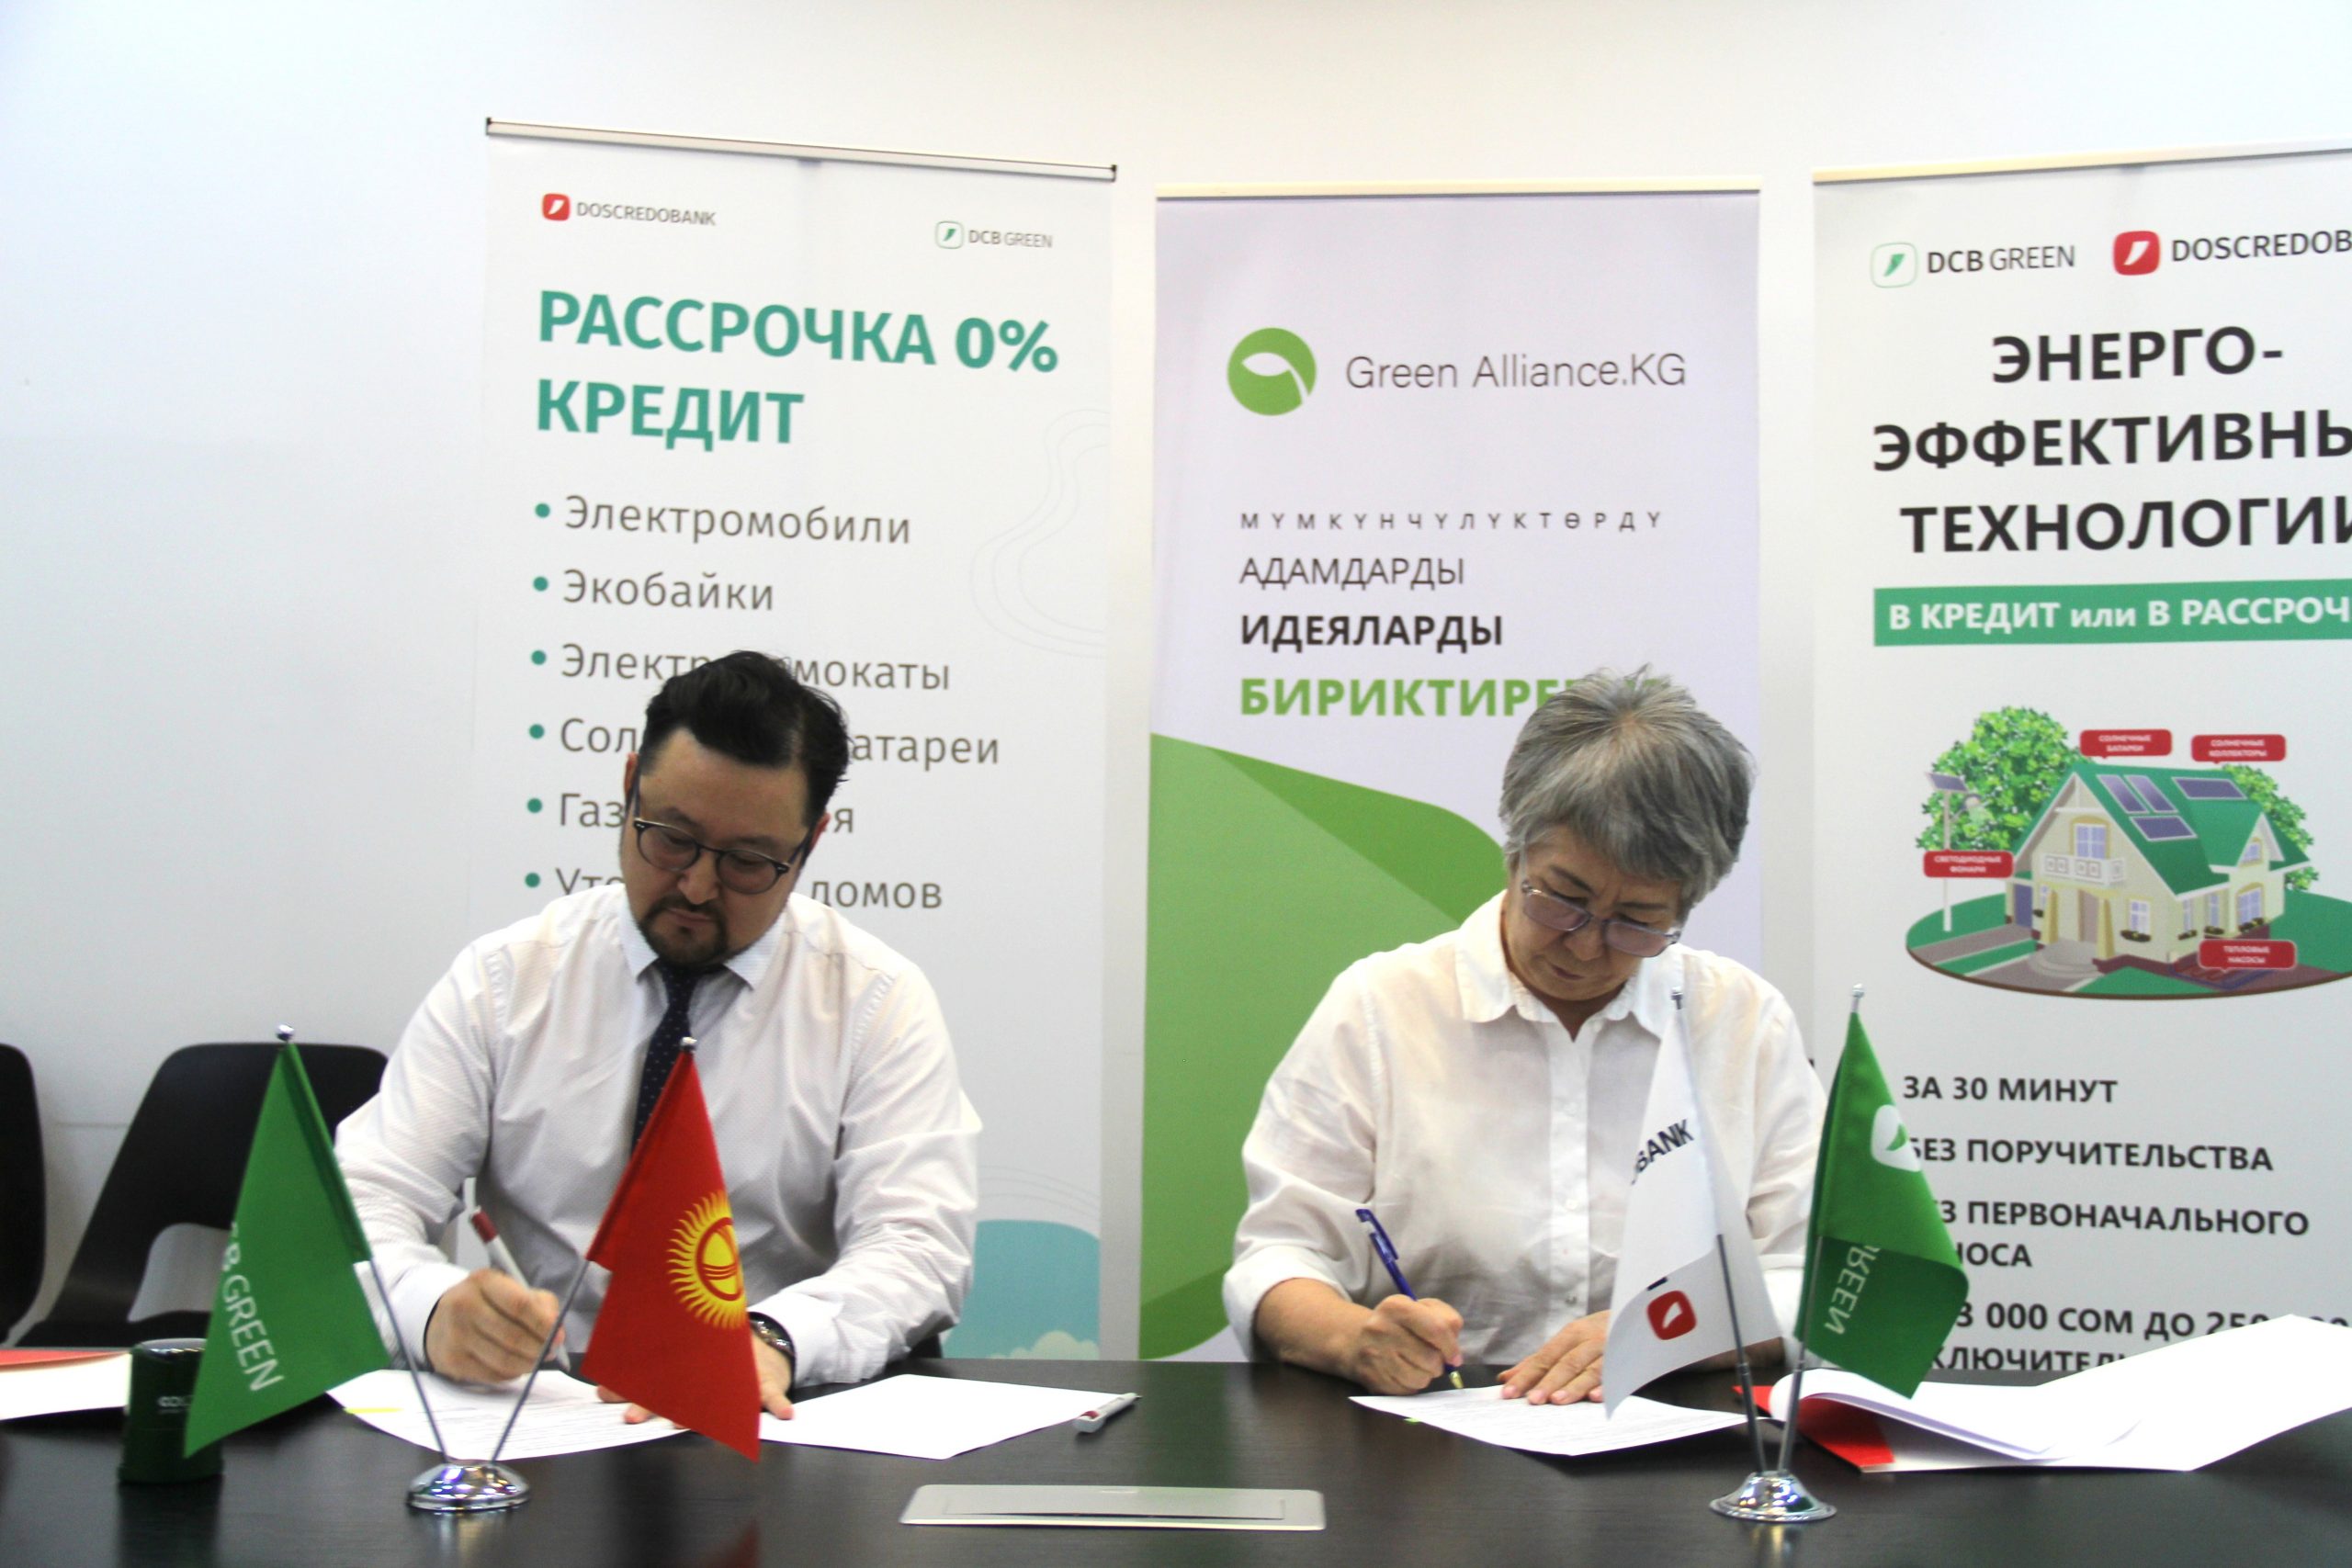 Doscredobank became a member of the Green Alliance KG